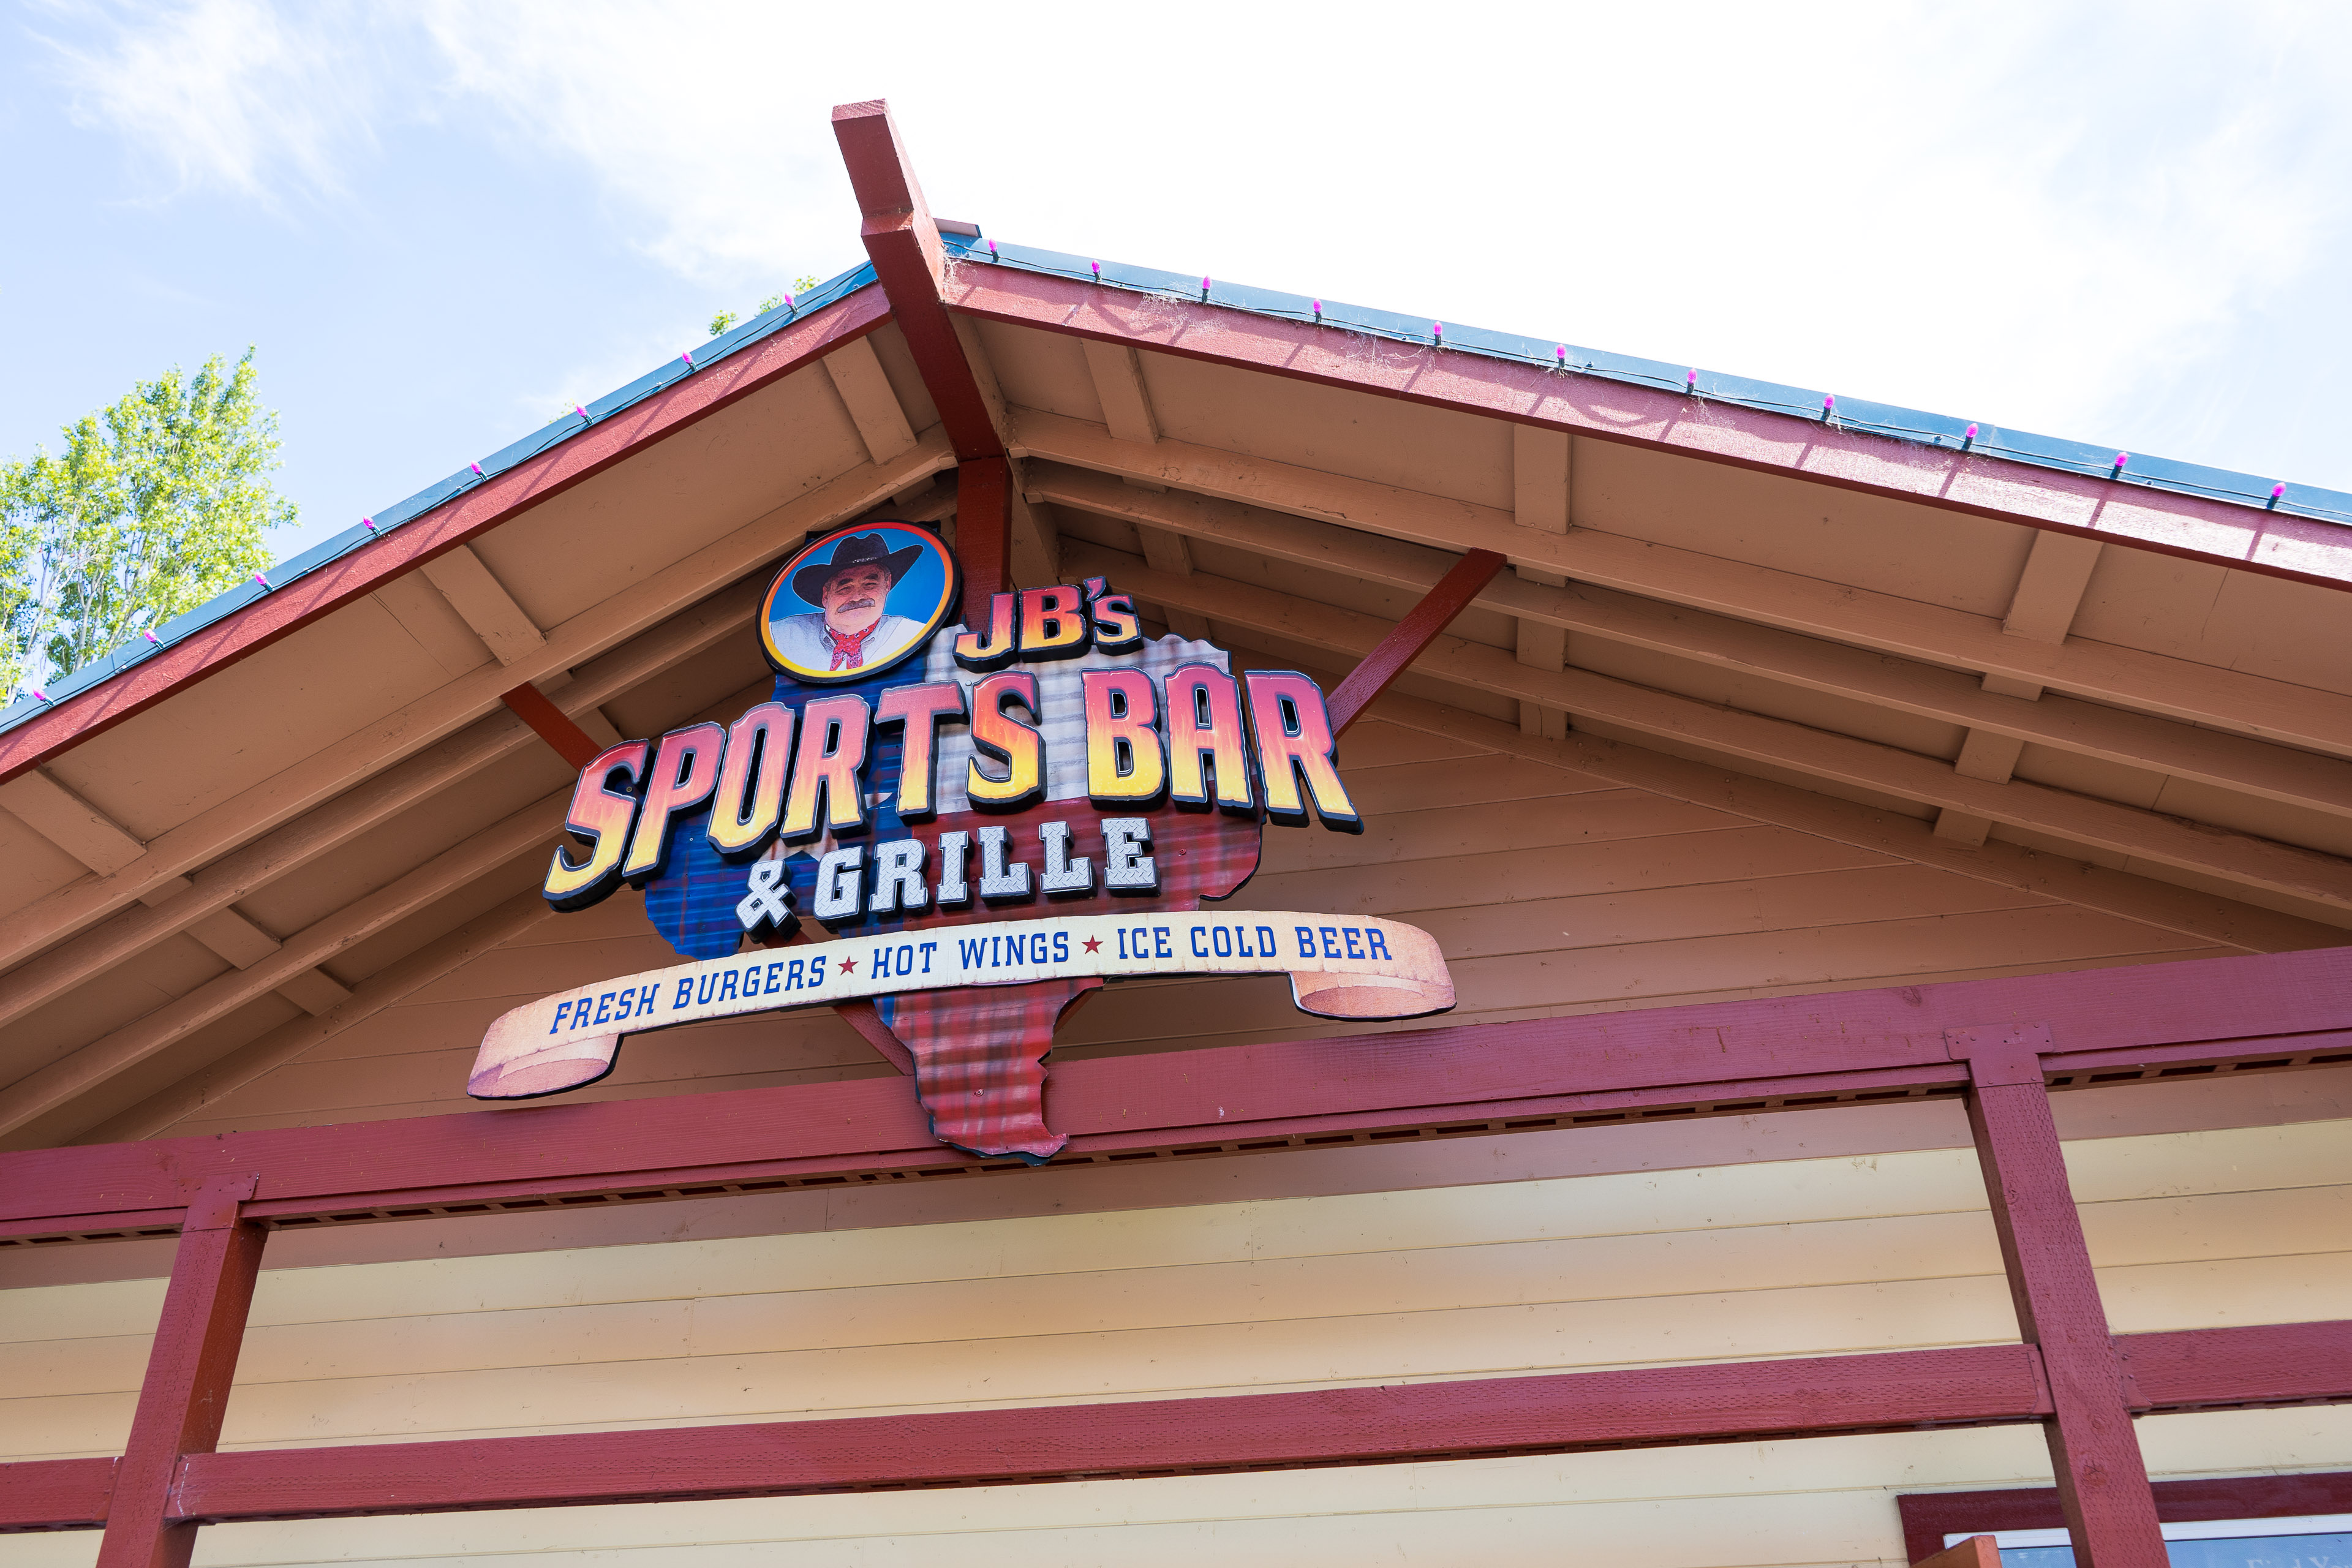 JB's Sports Bar And Grille